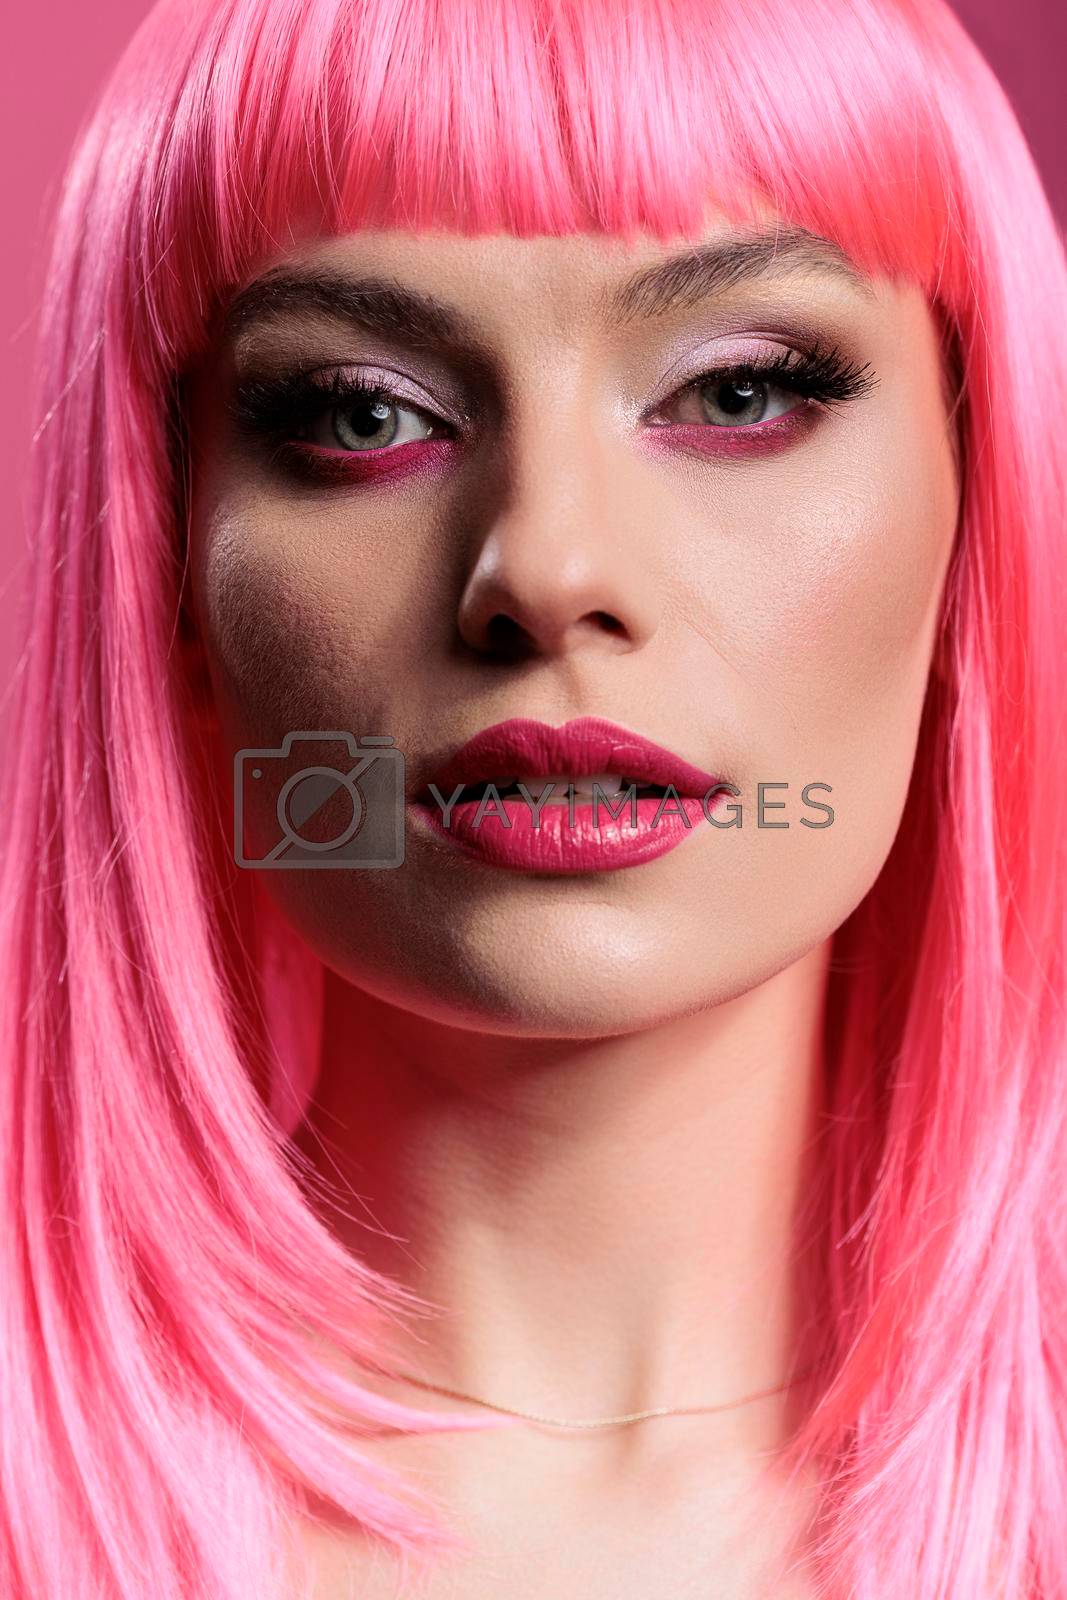 Royalty free image of Portrait of caucasian woman with sensual makeup and pink hair by DCStudio